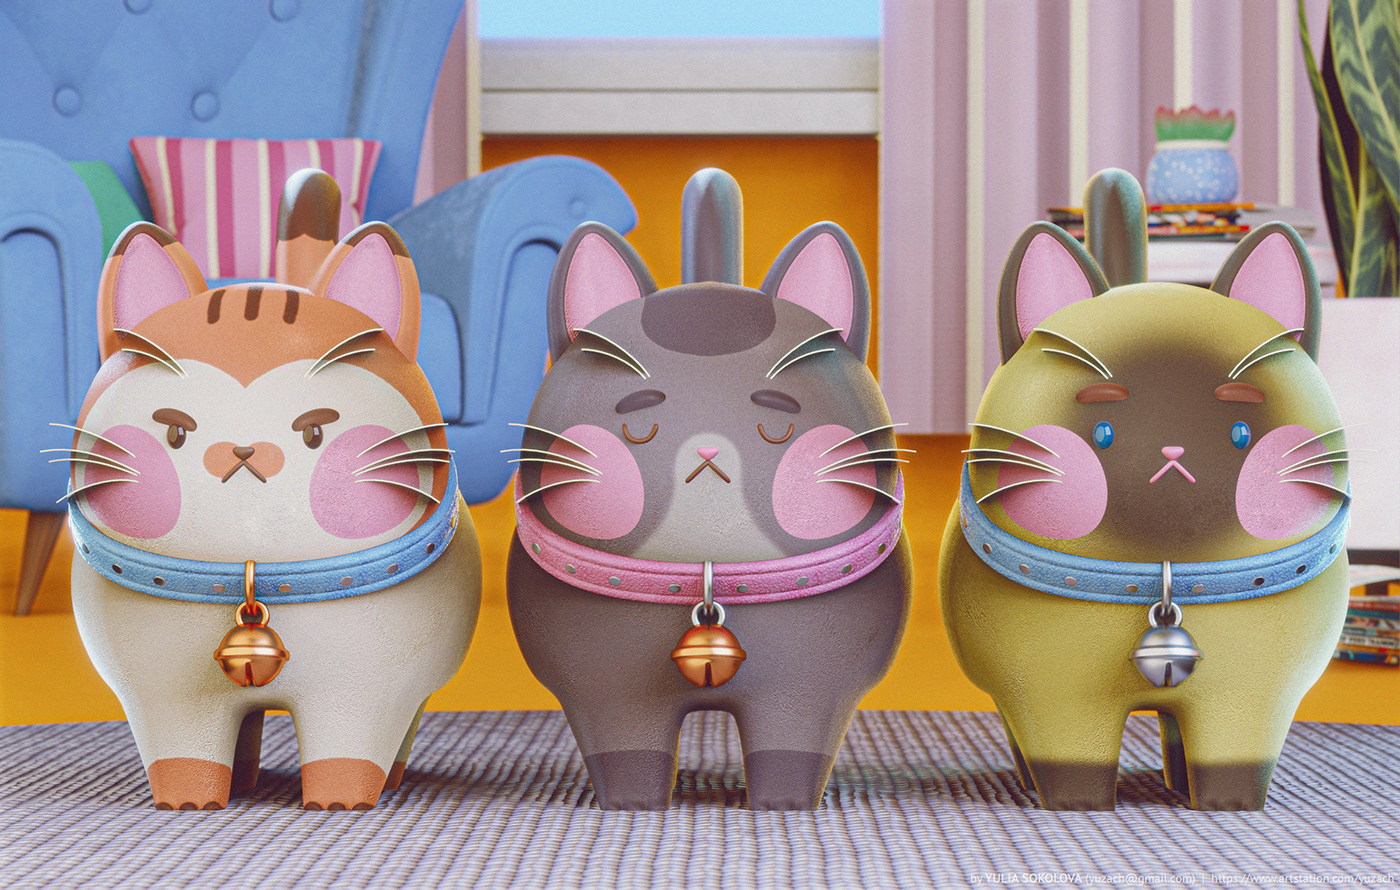 3D scene with cartoon characters: cats, succulent and stylized furniture, rendered in Blender Eevee